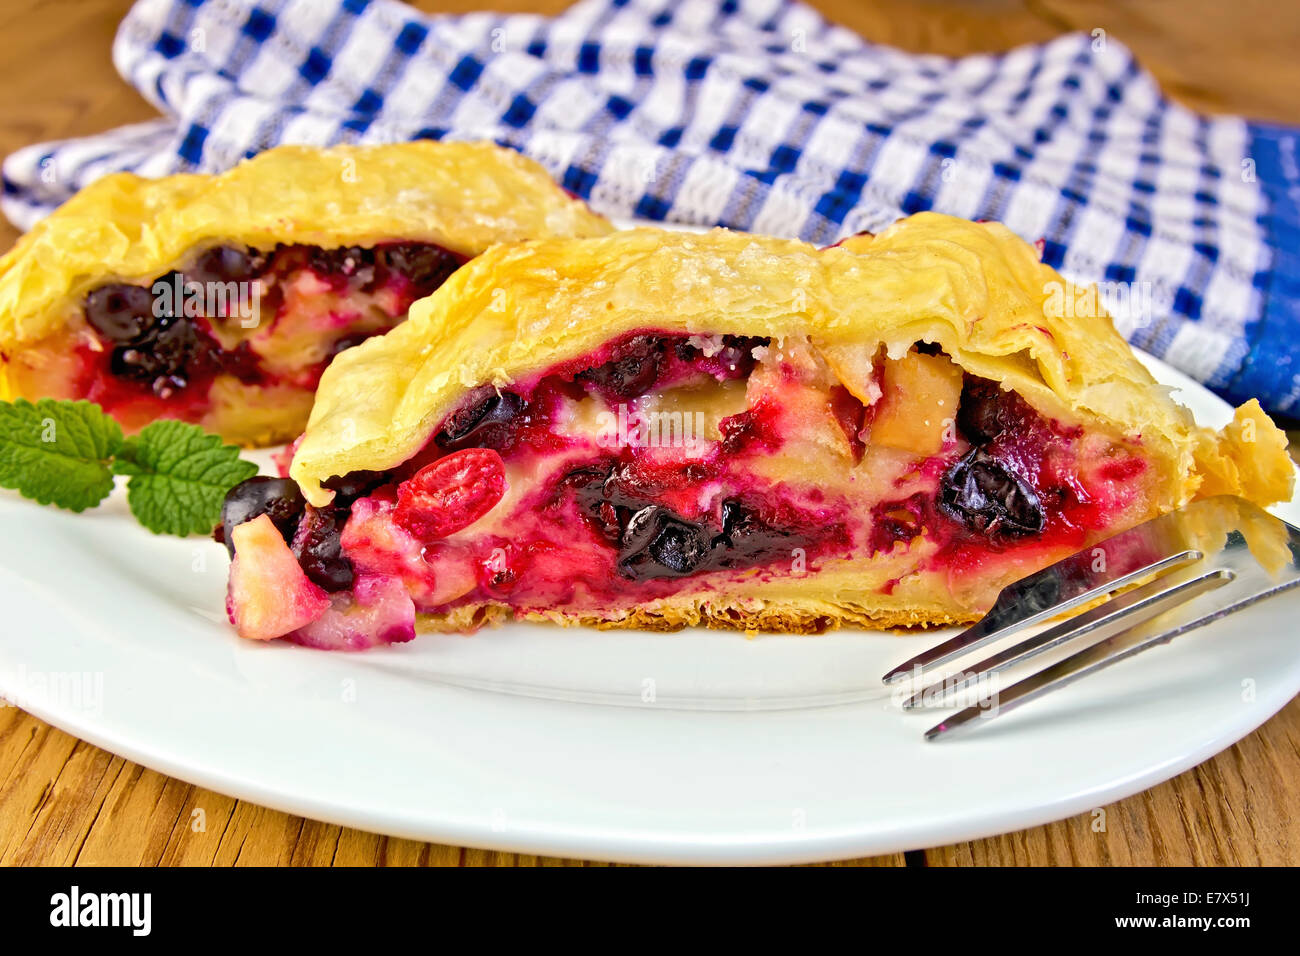 Strudel with black currant and cherry on a plate, napkin on the background of wooden boards Stock Photo